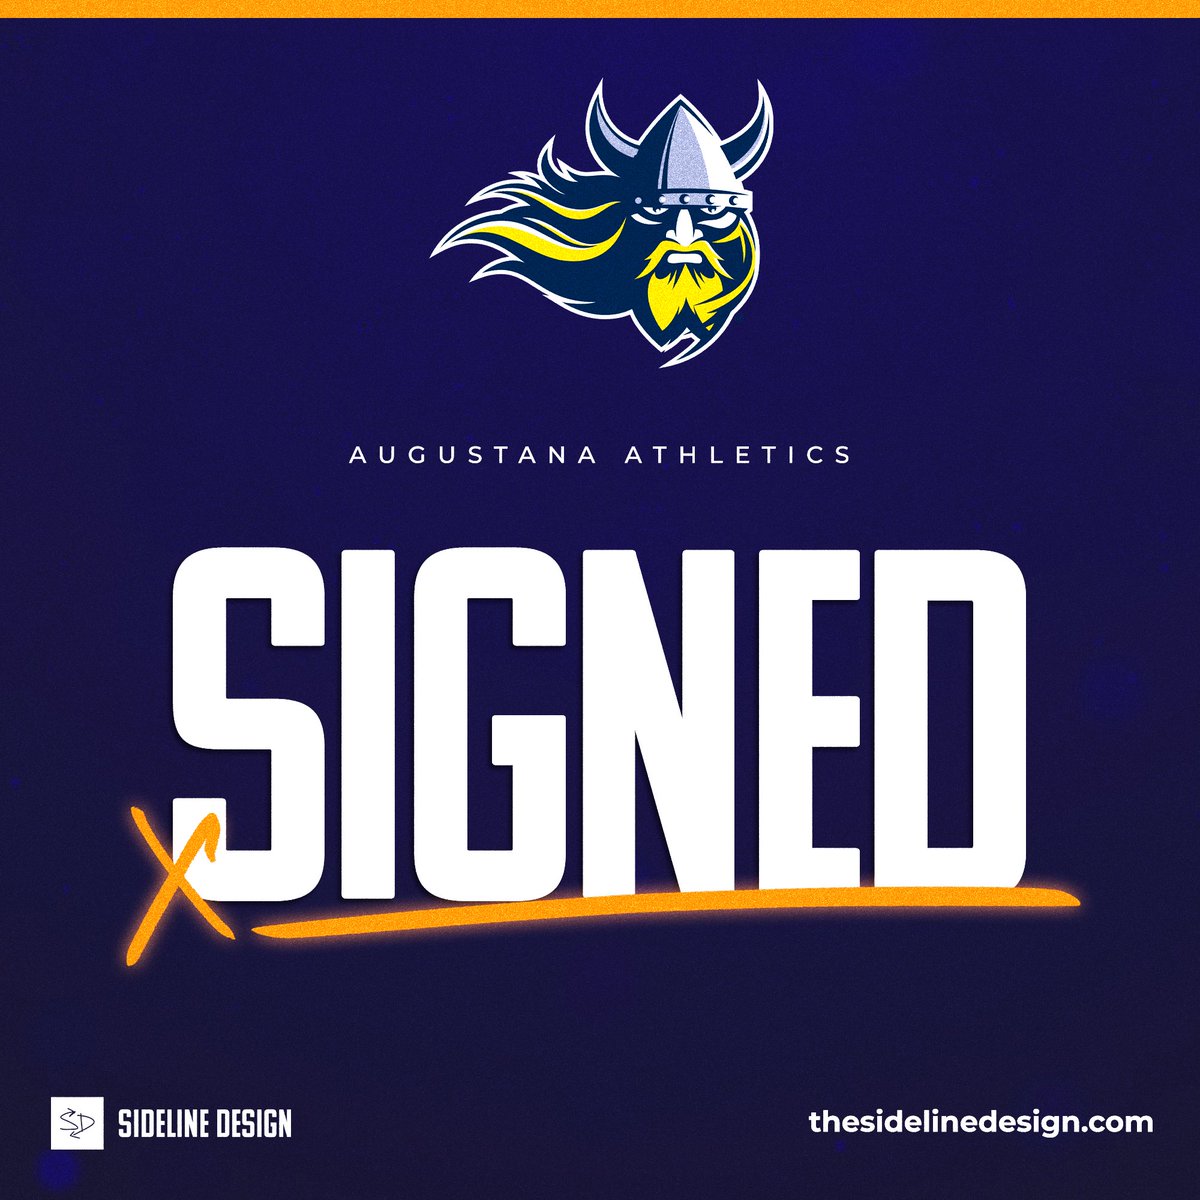 🔏 𝒮𝒾𝑔𝓃𝑒𝒹 🔏

Augustana is IN 🚀🚀🚀

We are pumped to have the Vikings join the Sideline team!

#SDbuilt // #BuildingChampions